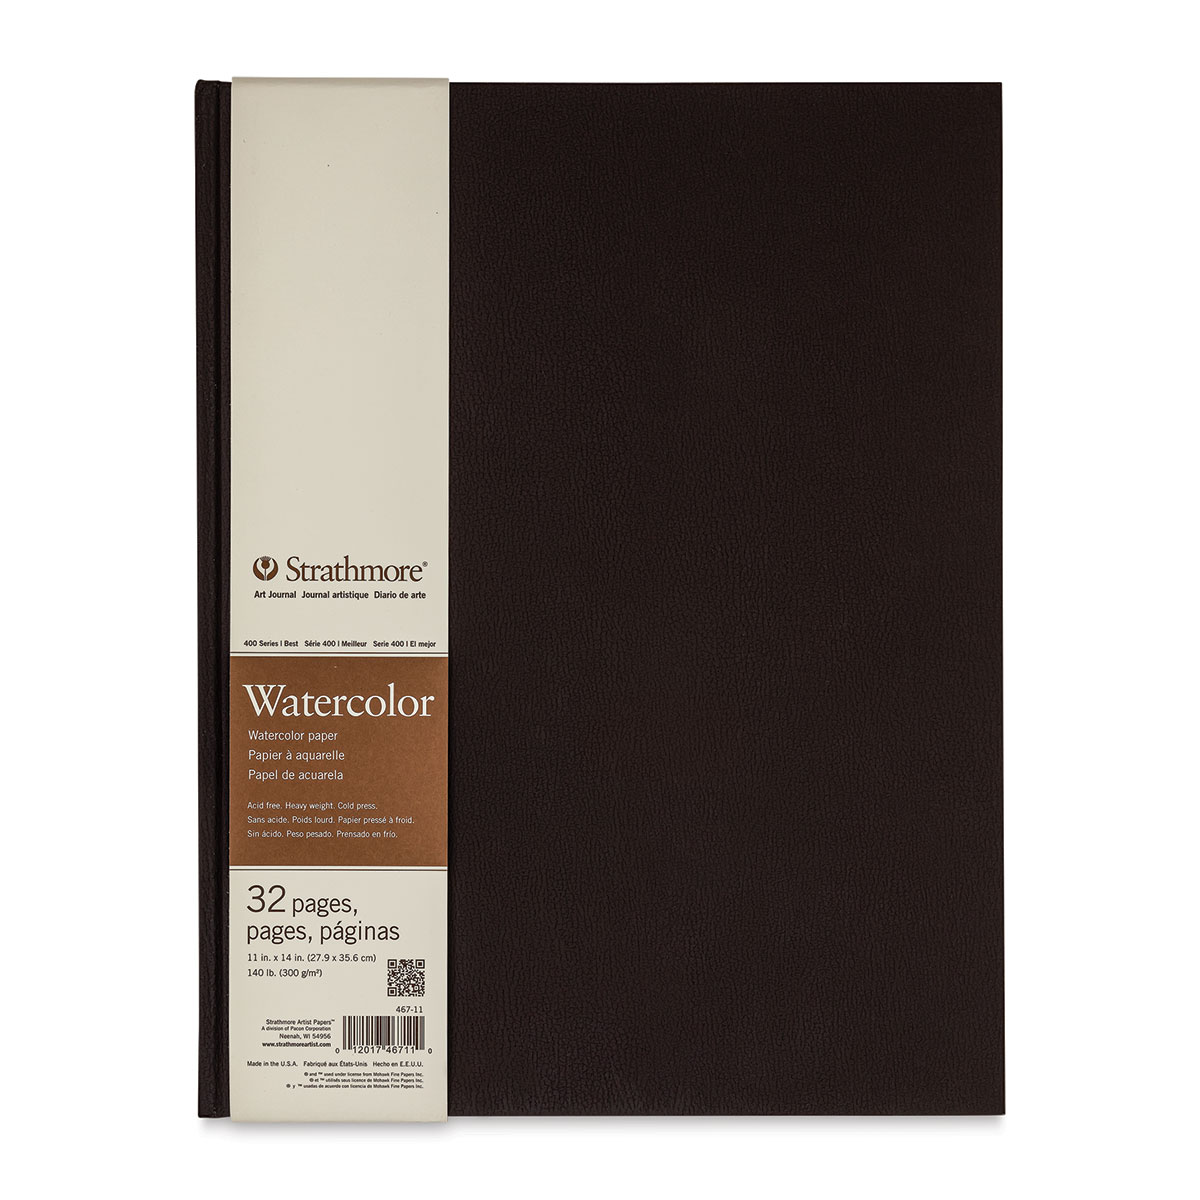 Strathmore 400 Series Visual Watercolor Journal 140 LB 5 5x8 Cold